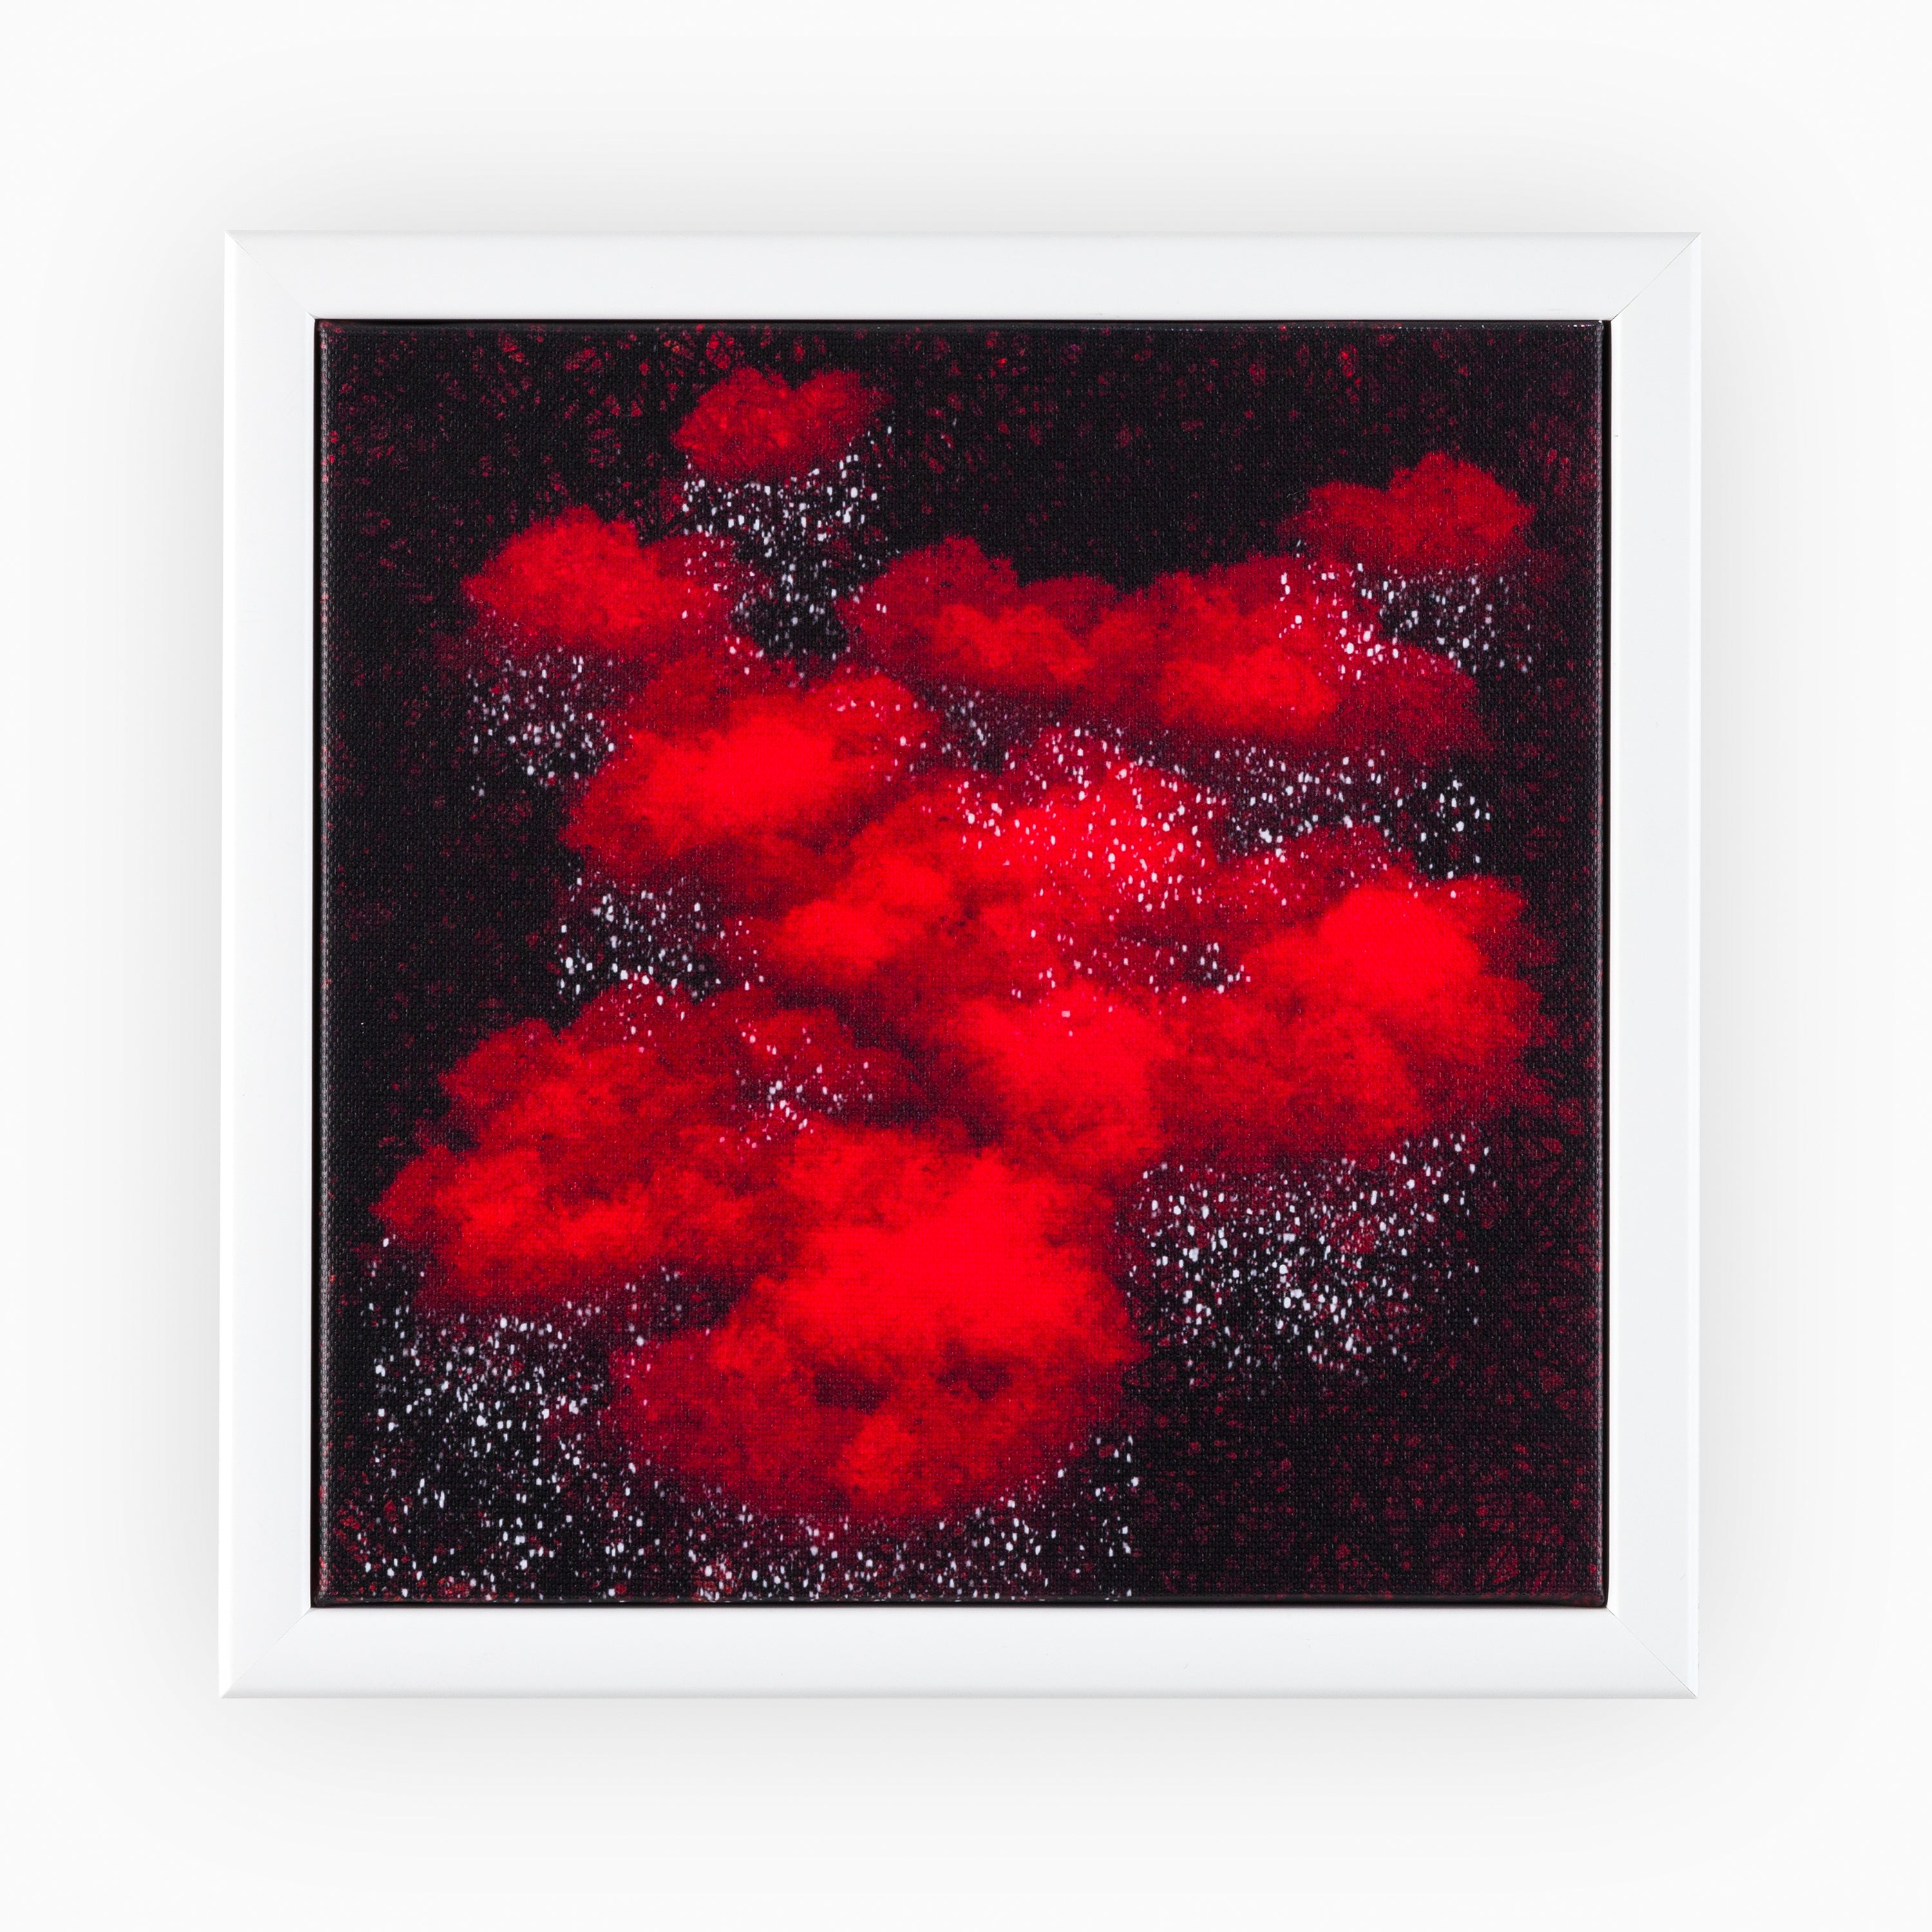 Deluxe canvas piece with a white frame, presenting a vibrant astral display of red nebula-like formations on a star-filled night sky, offering a bold statement in any opulent space.